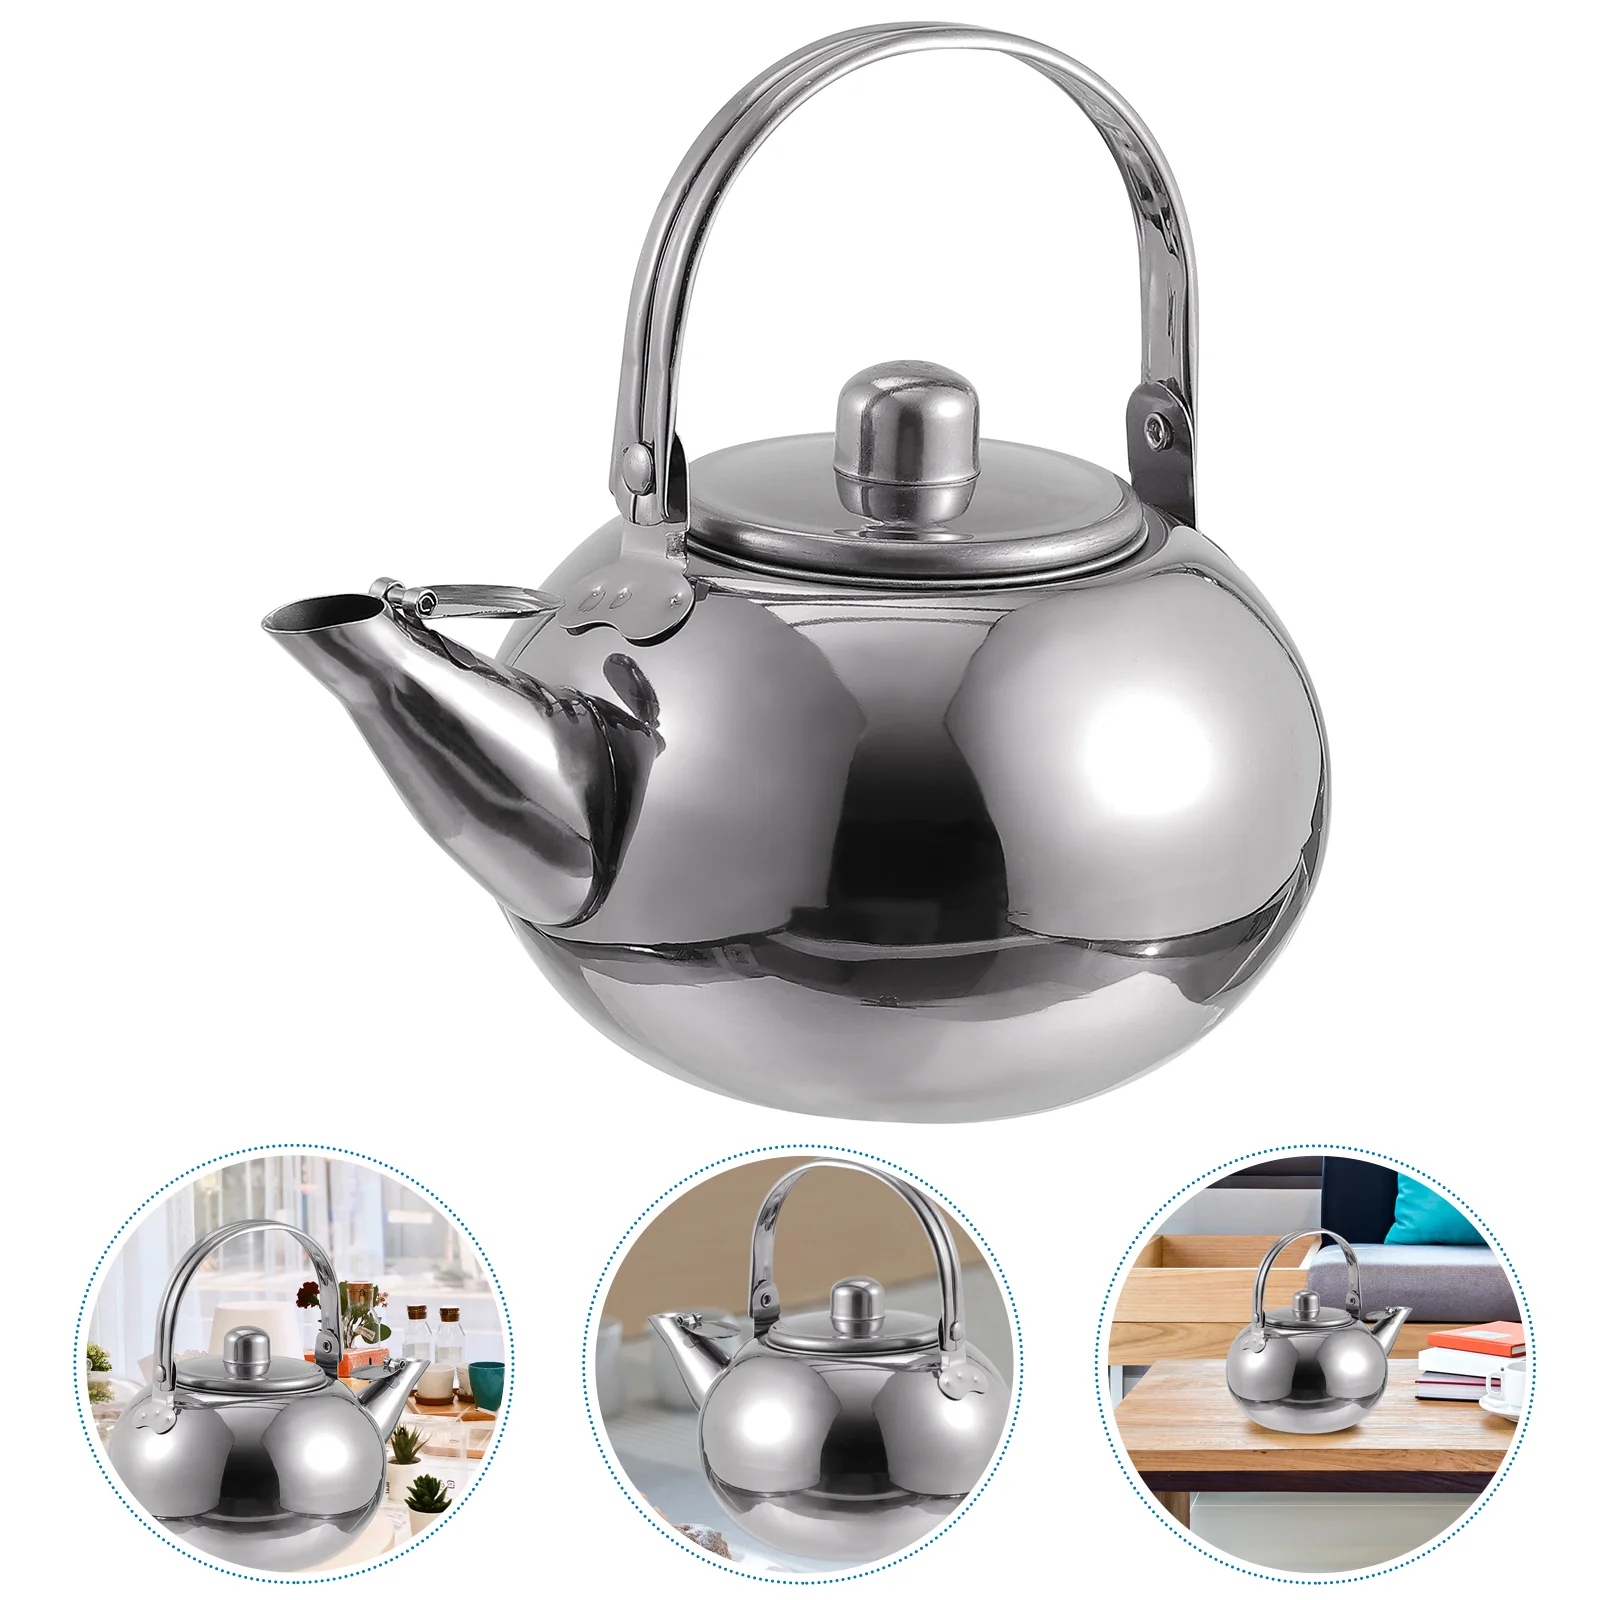 

Tea Kettle Teapot Pot Water Steel Stainless Stovetop Stove Whistling Infuser Metal Boiling Strainer Loose Filter Teakettle Pots